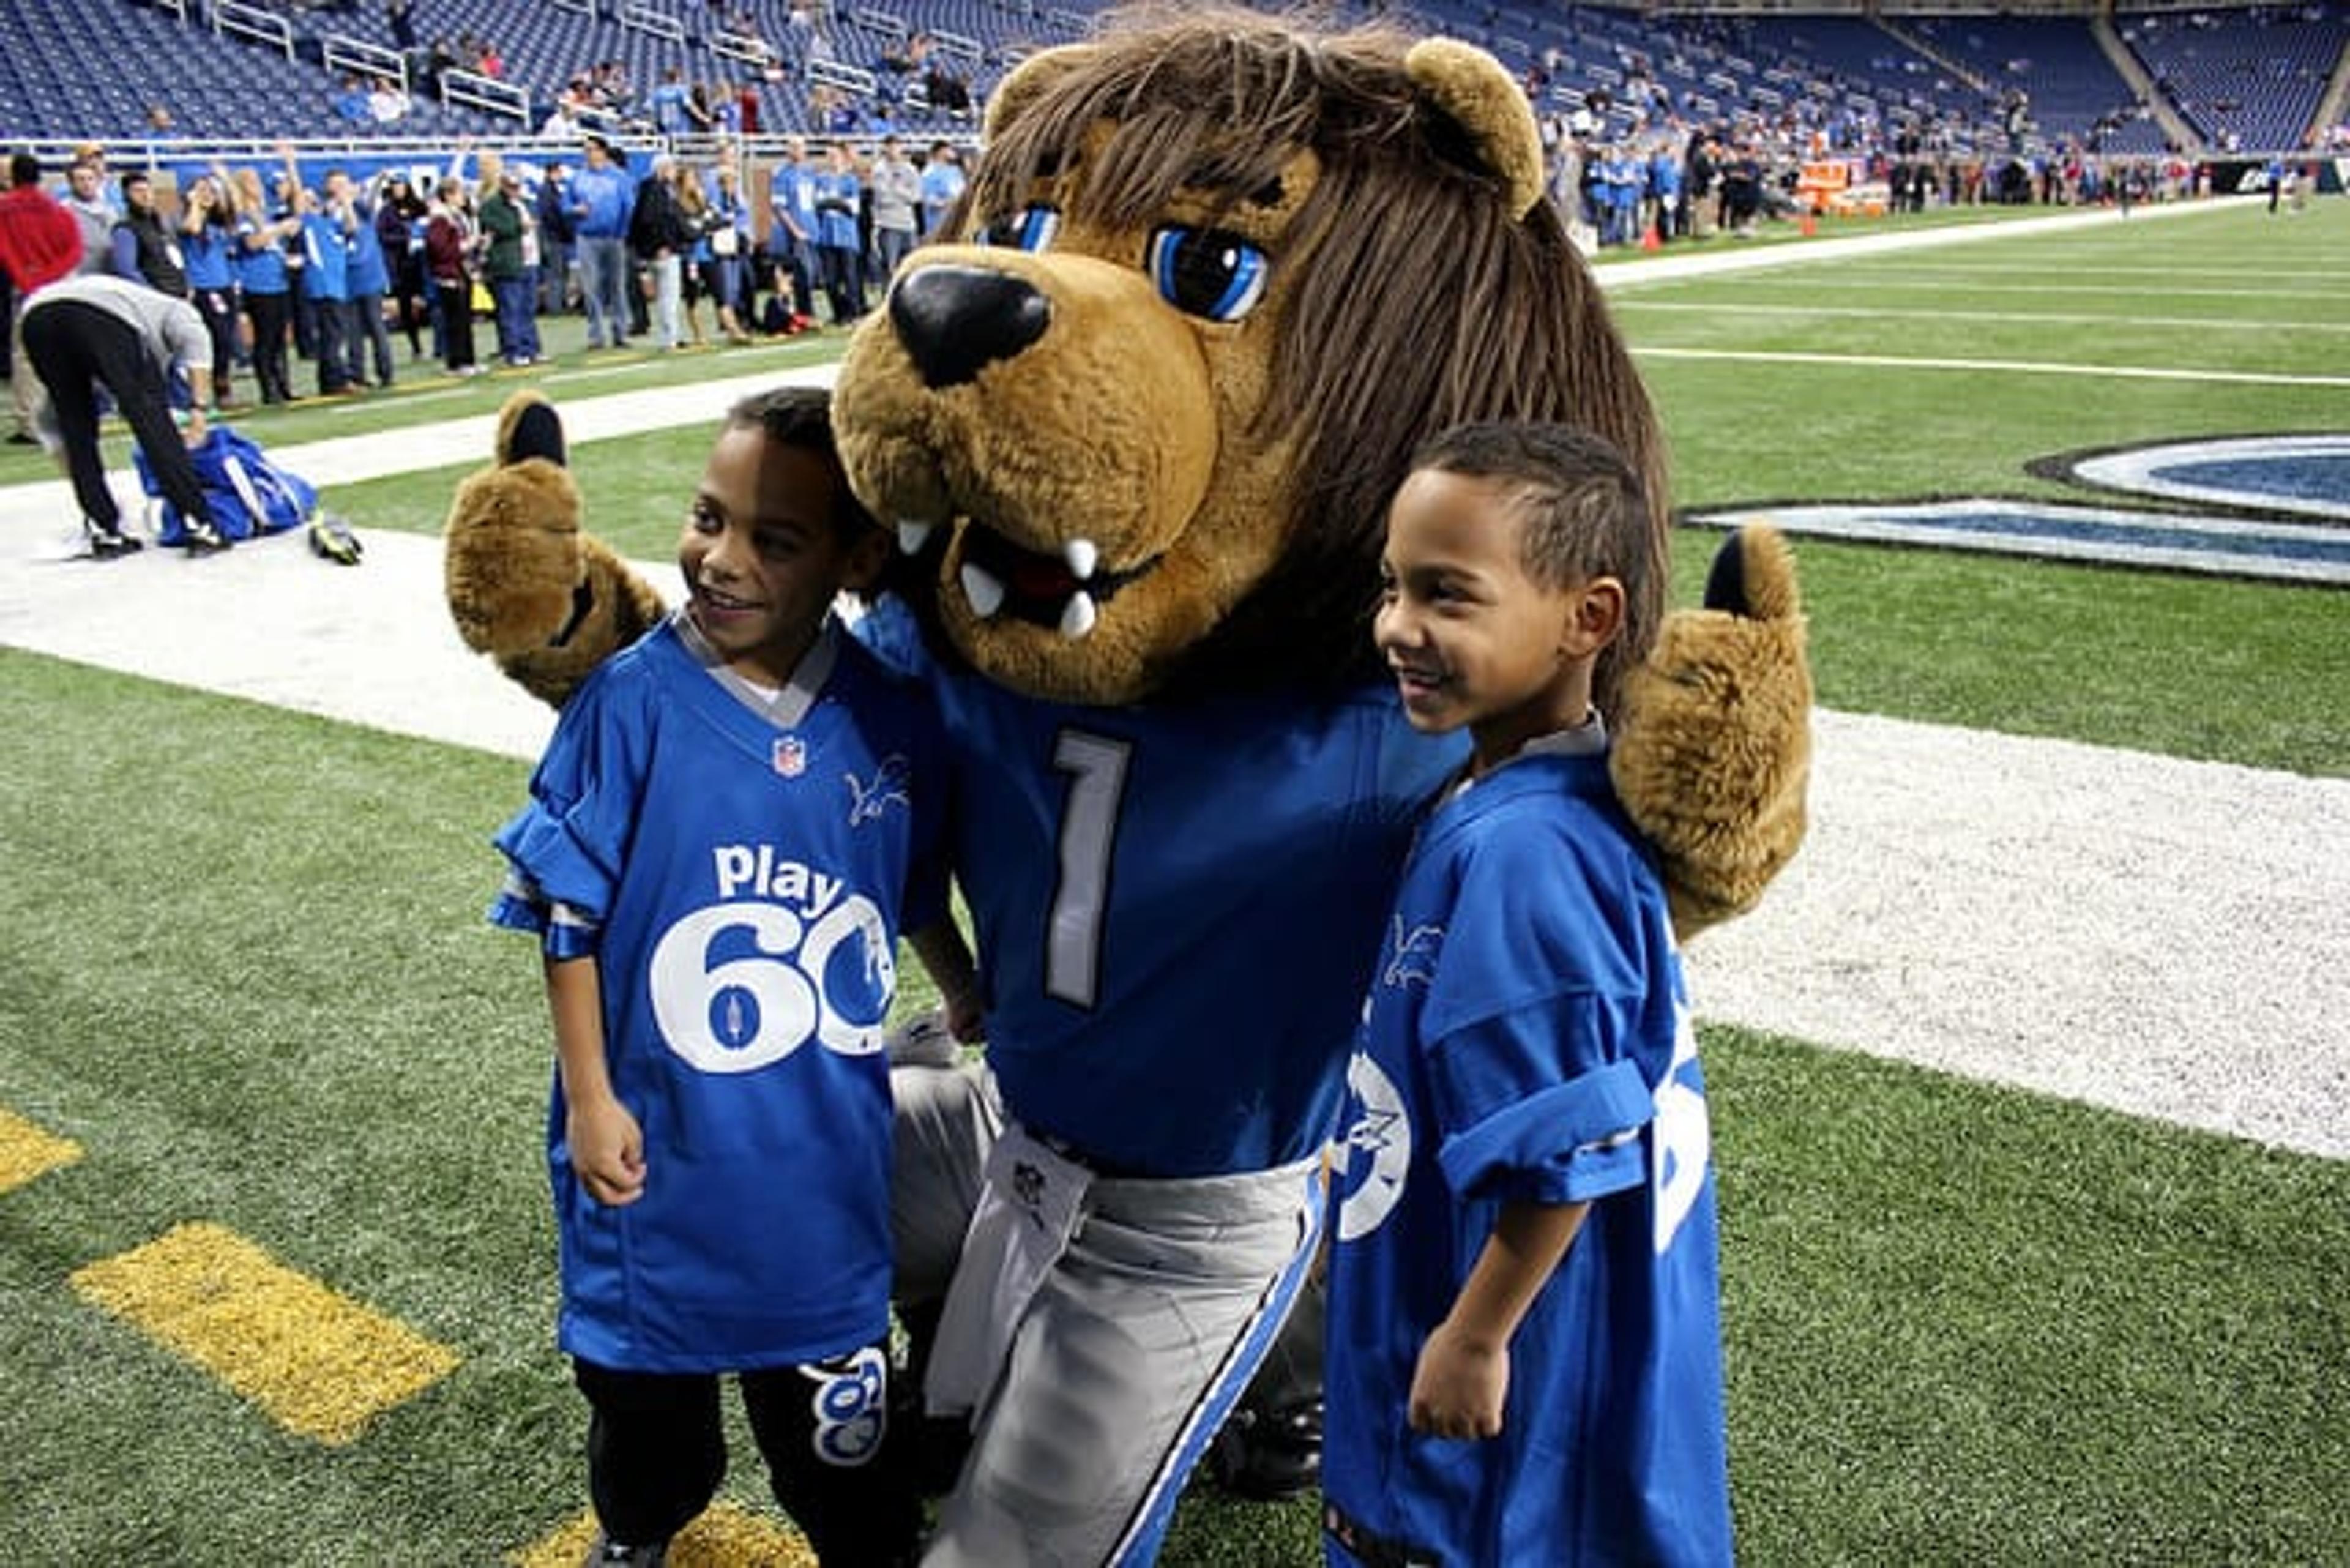 Roary the Lion posing with kids at a Detroit Lions game.